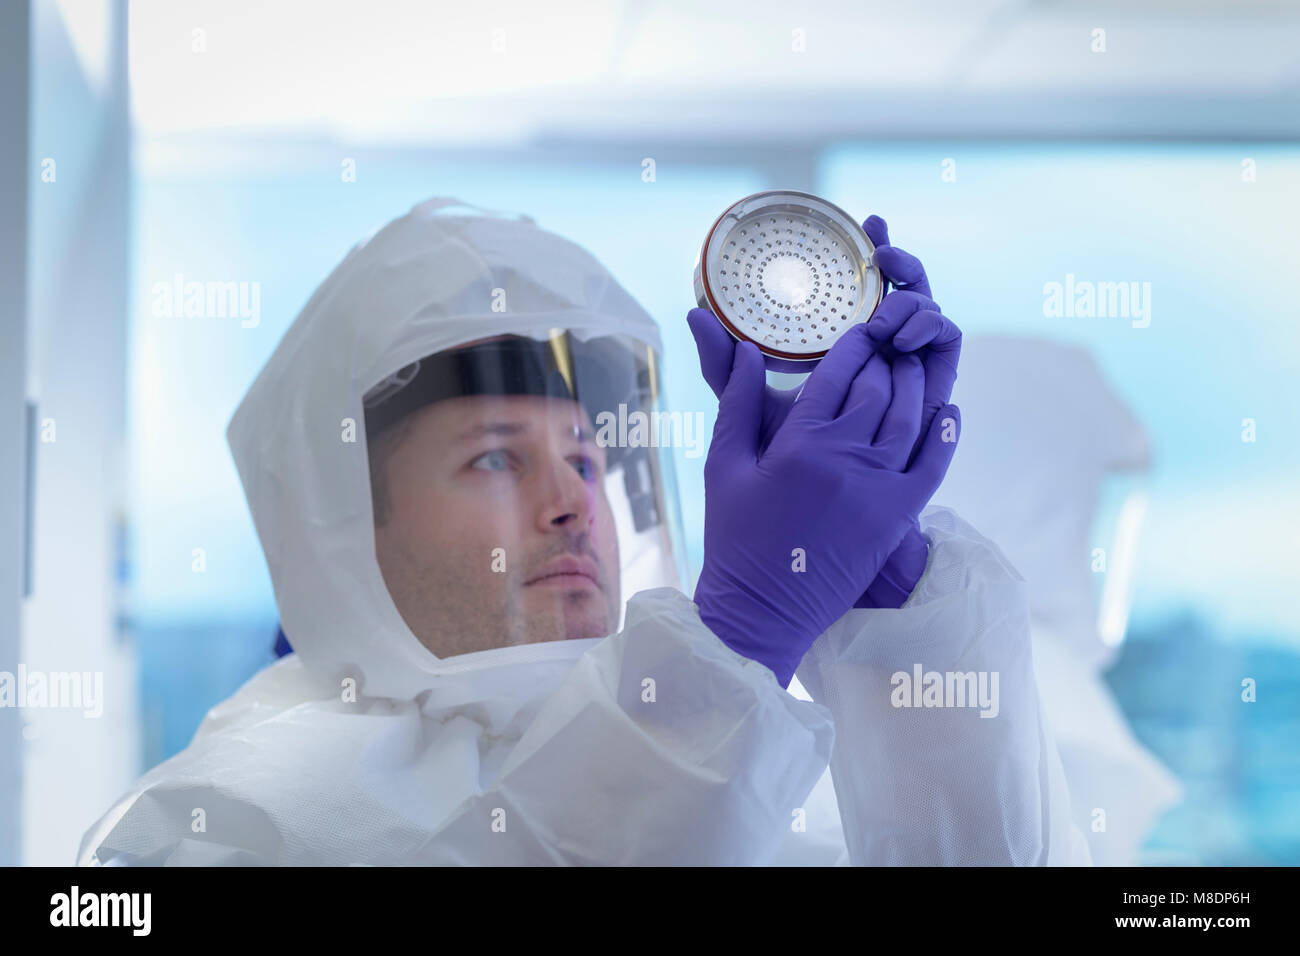 Scientist in protective wear inspecting filter in laboratory Stock Photo